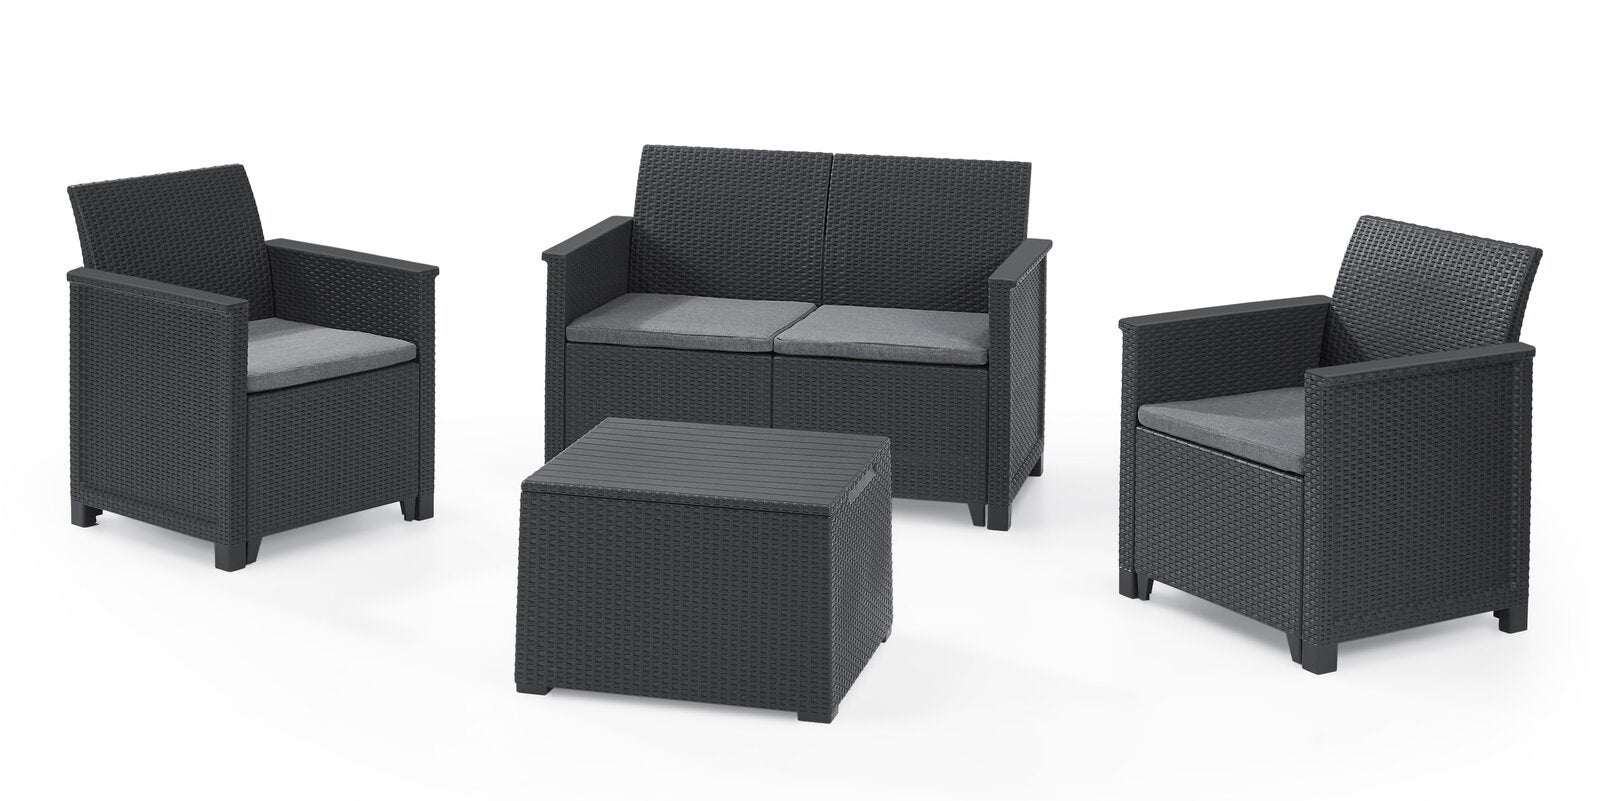 Keter Emma Outdoor Four Seater Lounge Set